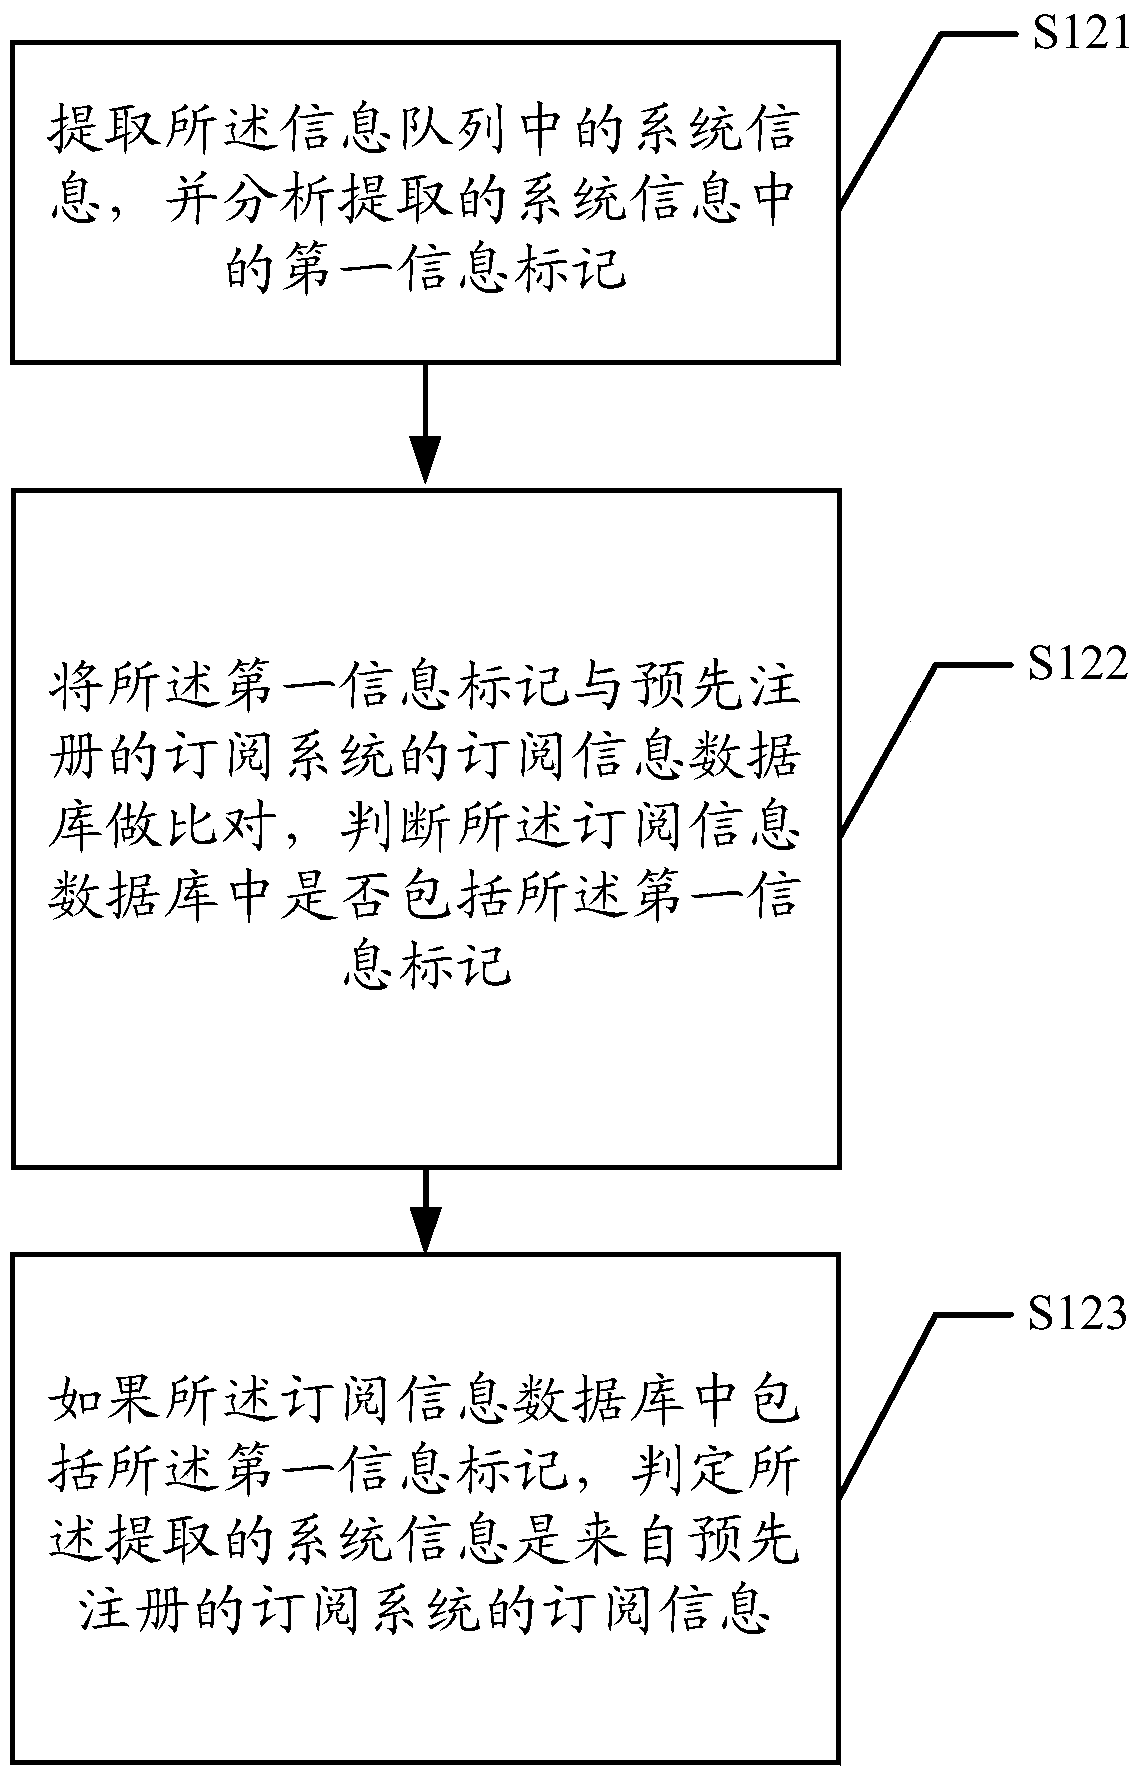 Information interaction method and middleware system between software systems